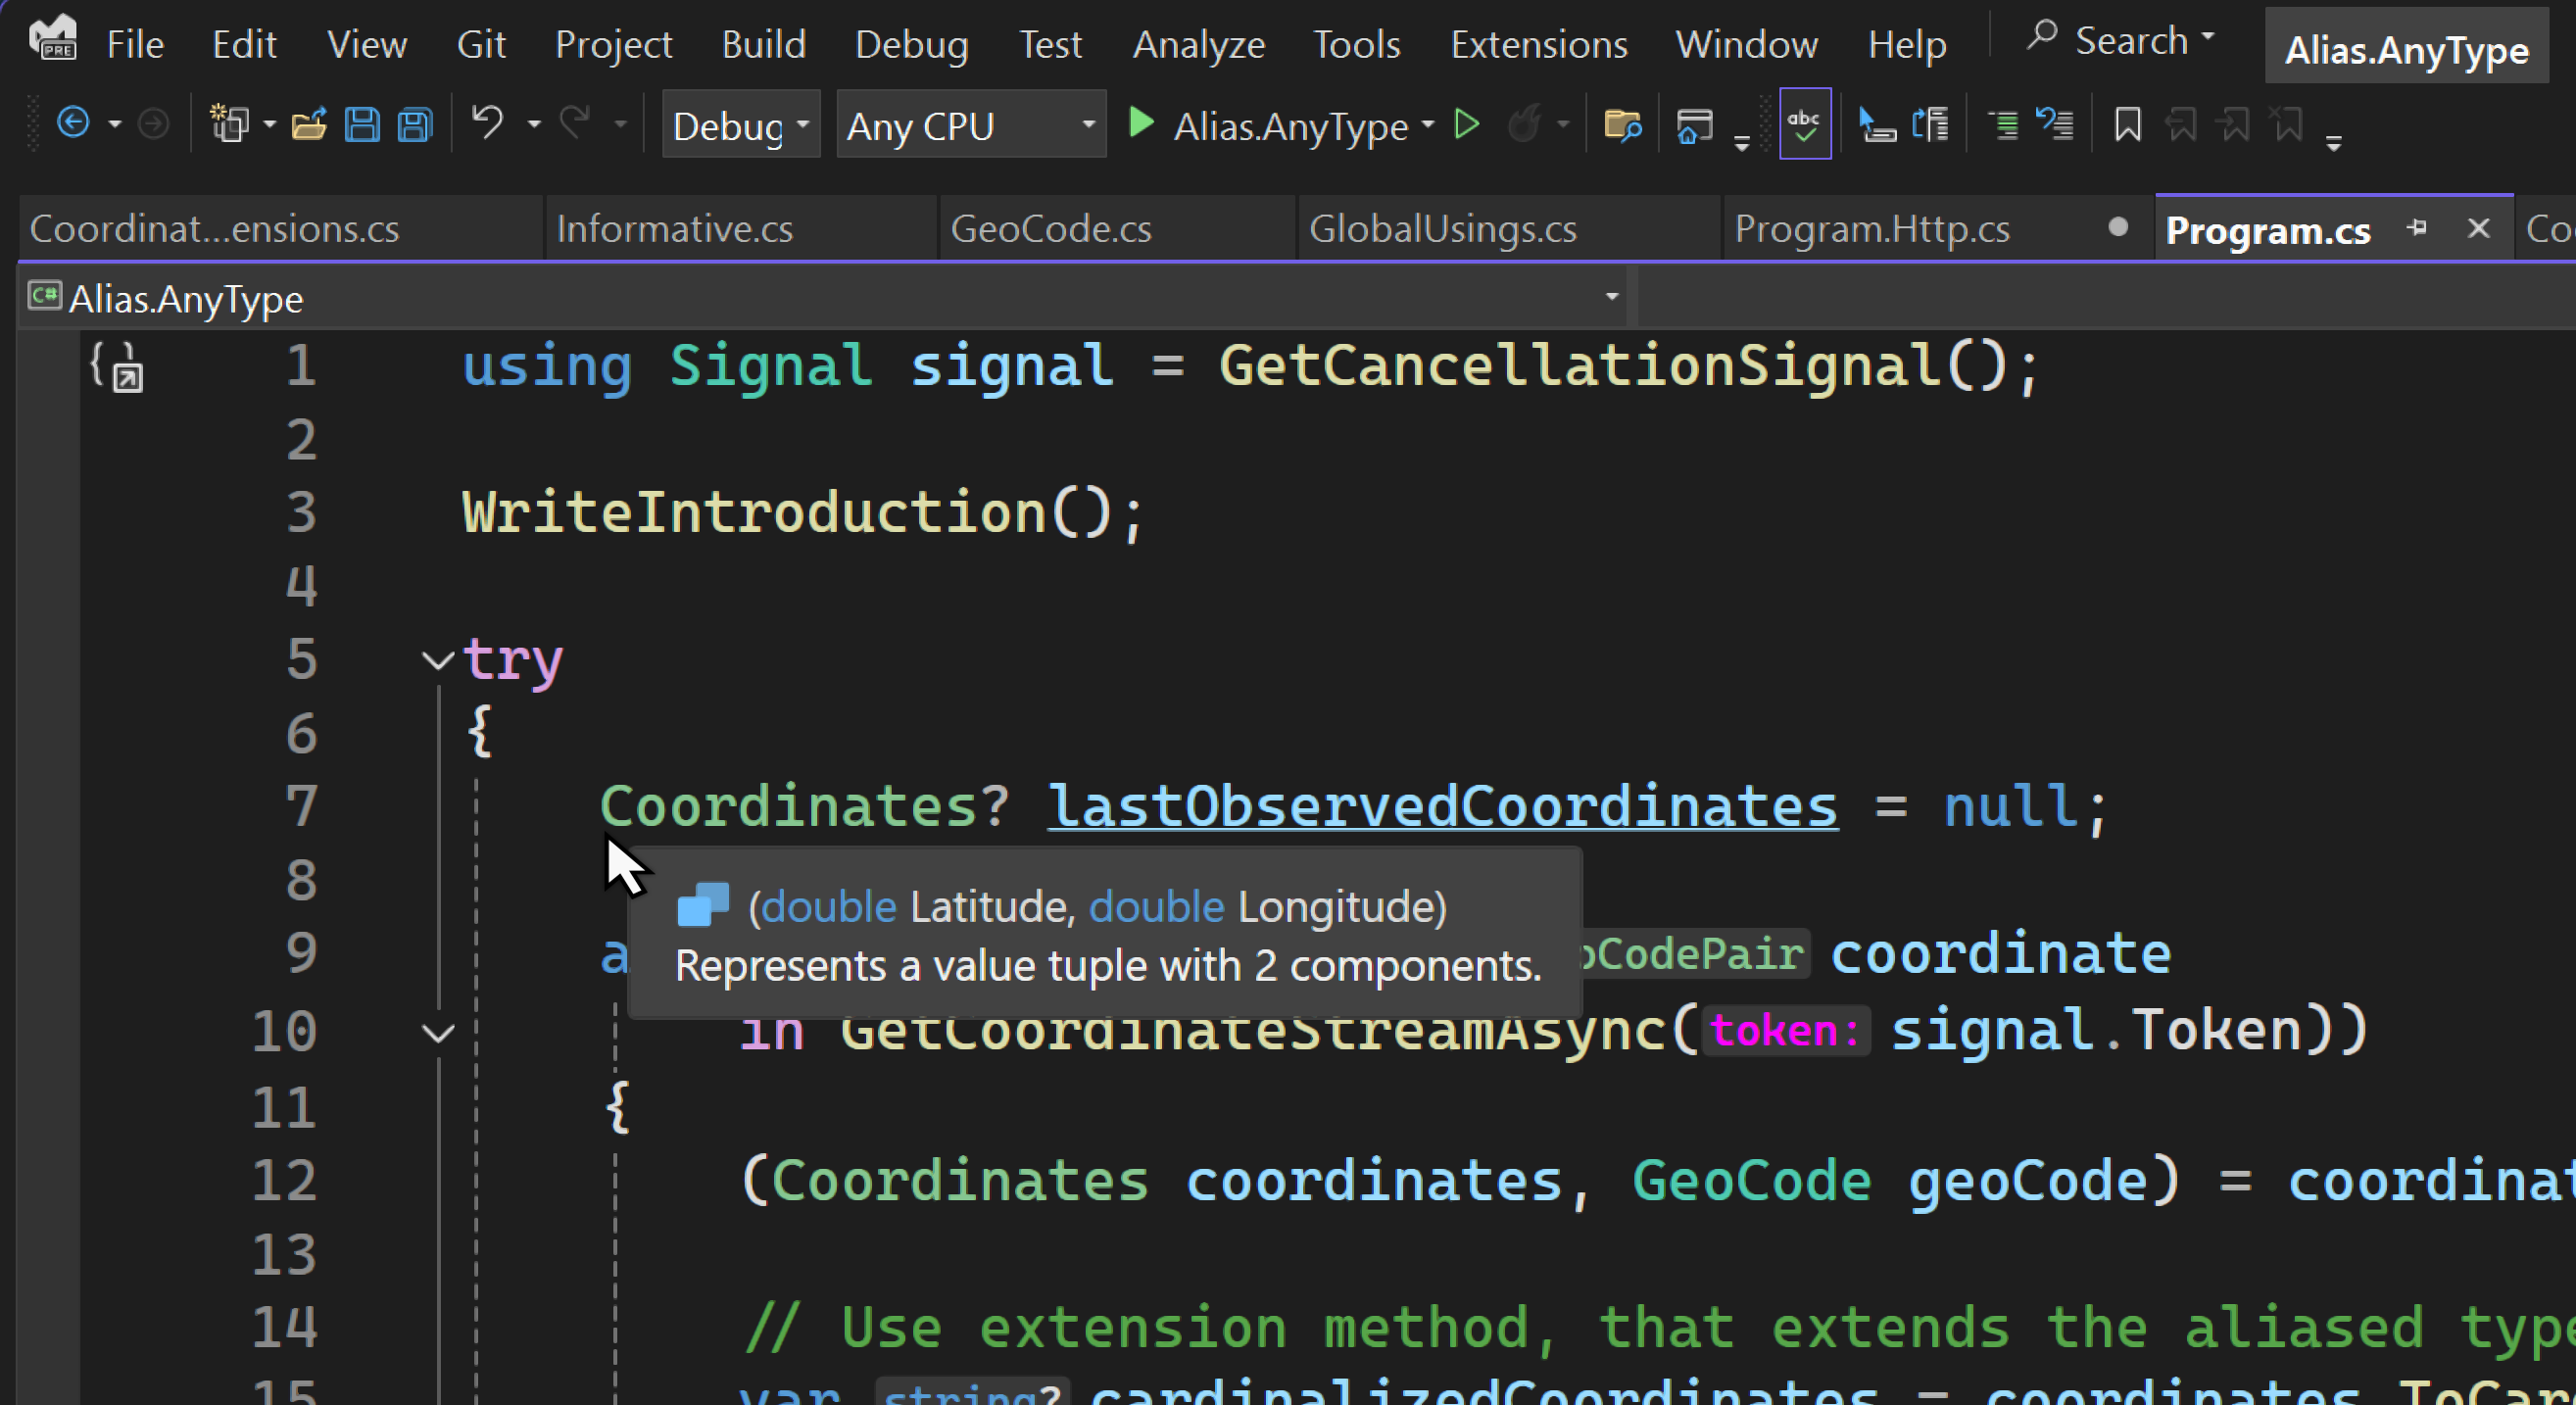 Visual Studio: Hover over the Coordinates type declaration to reveal it's a value tuple (double, double).